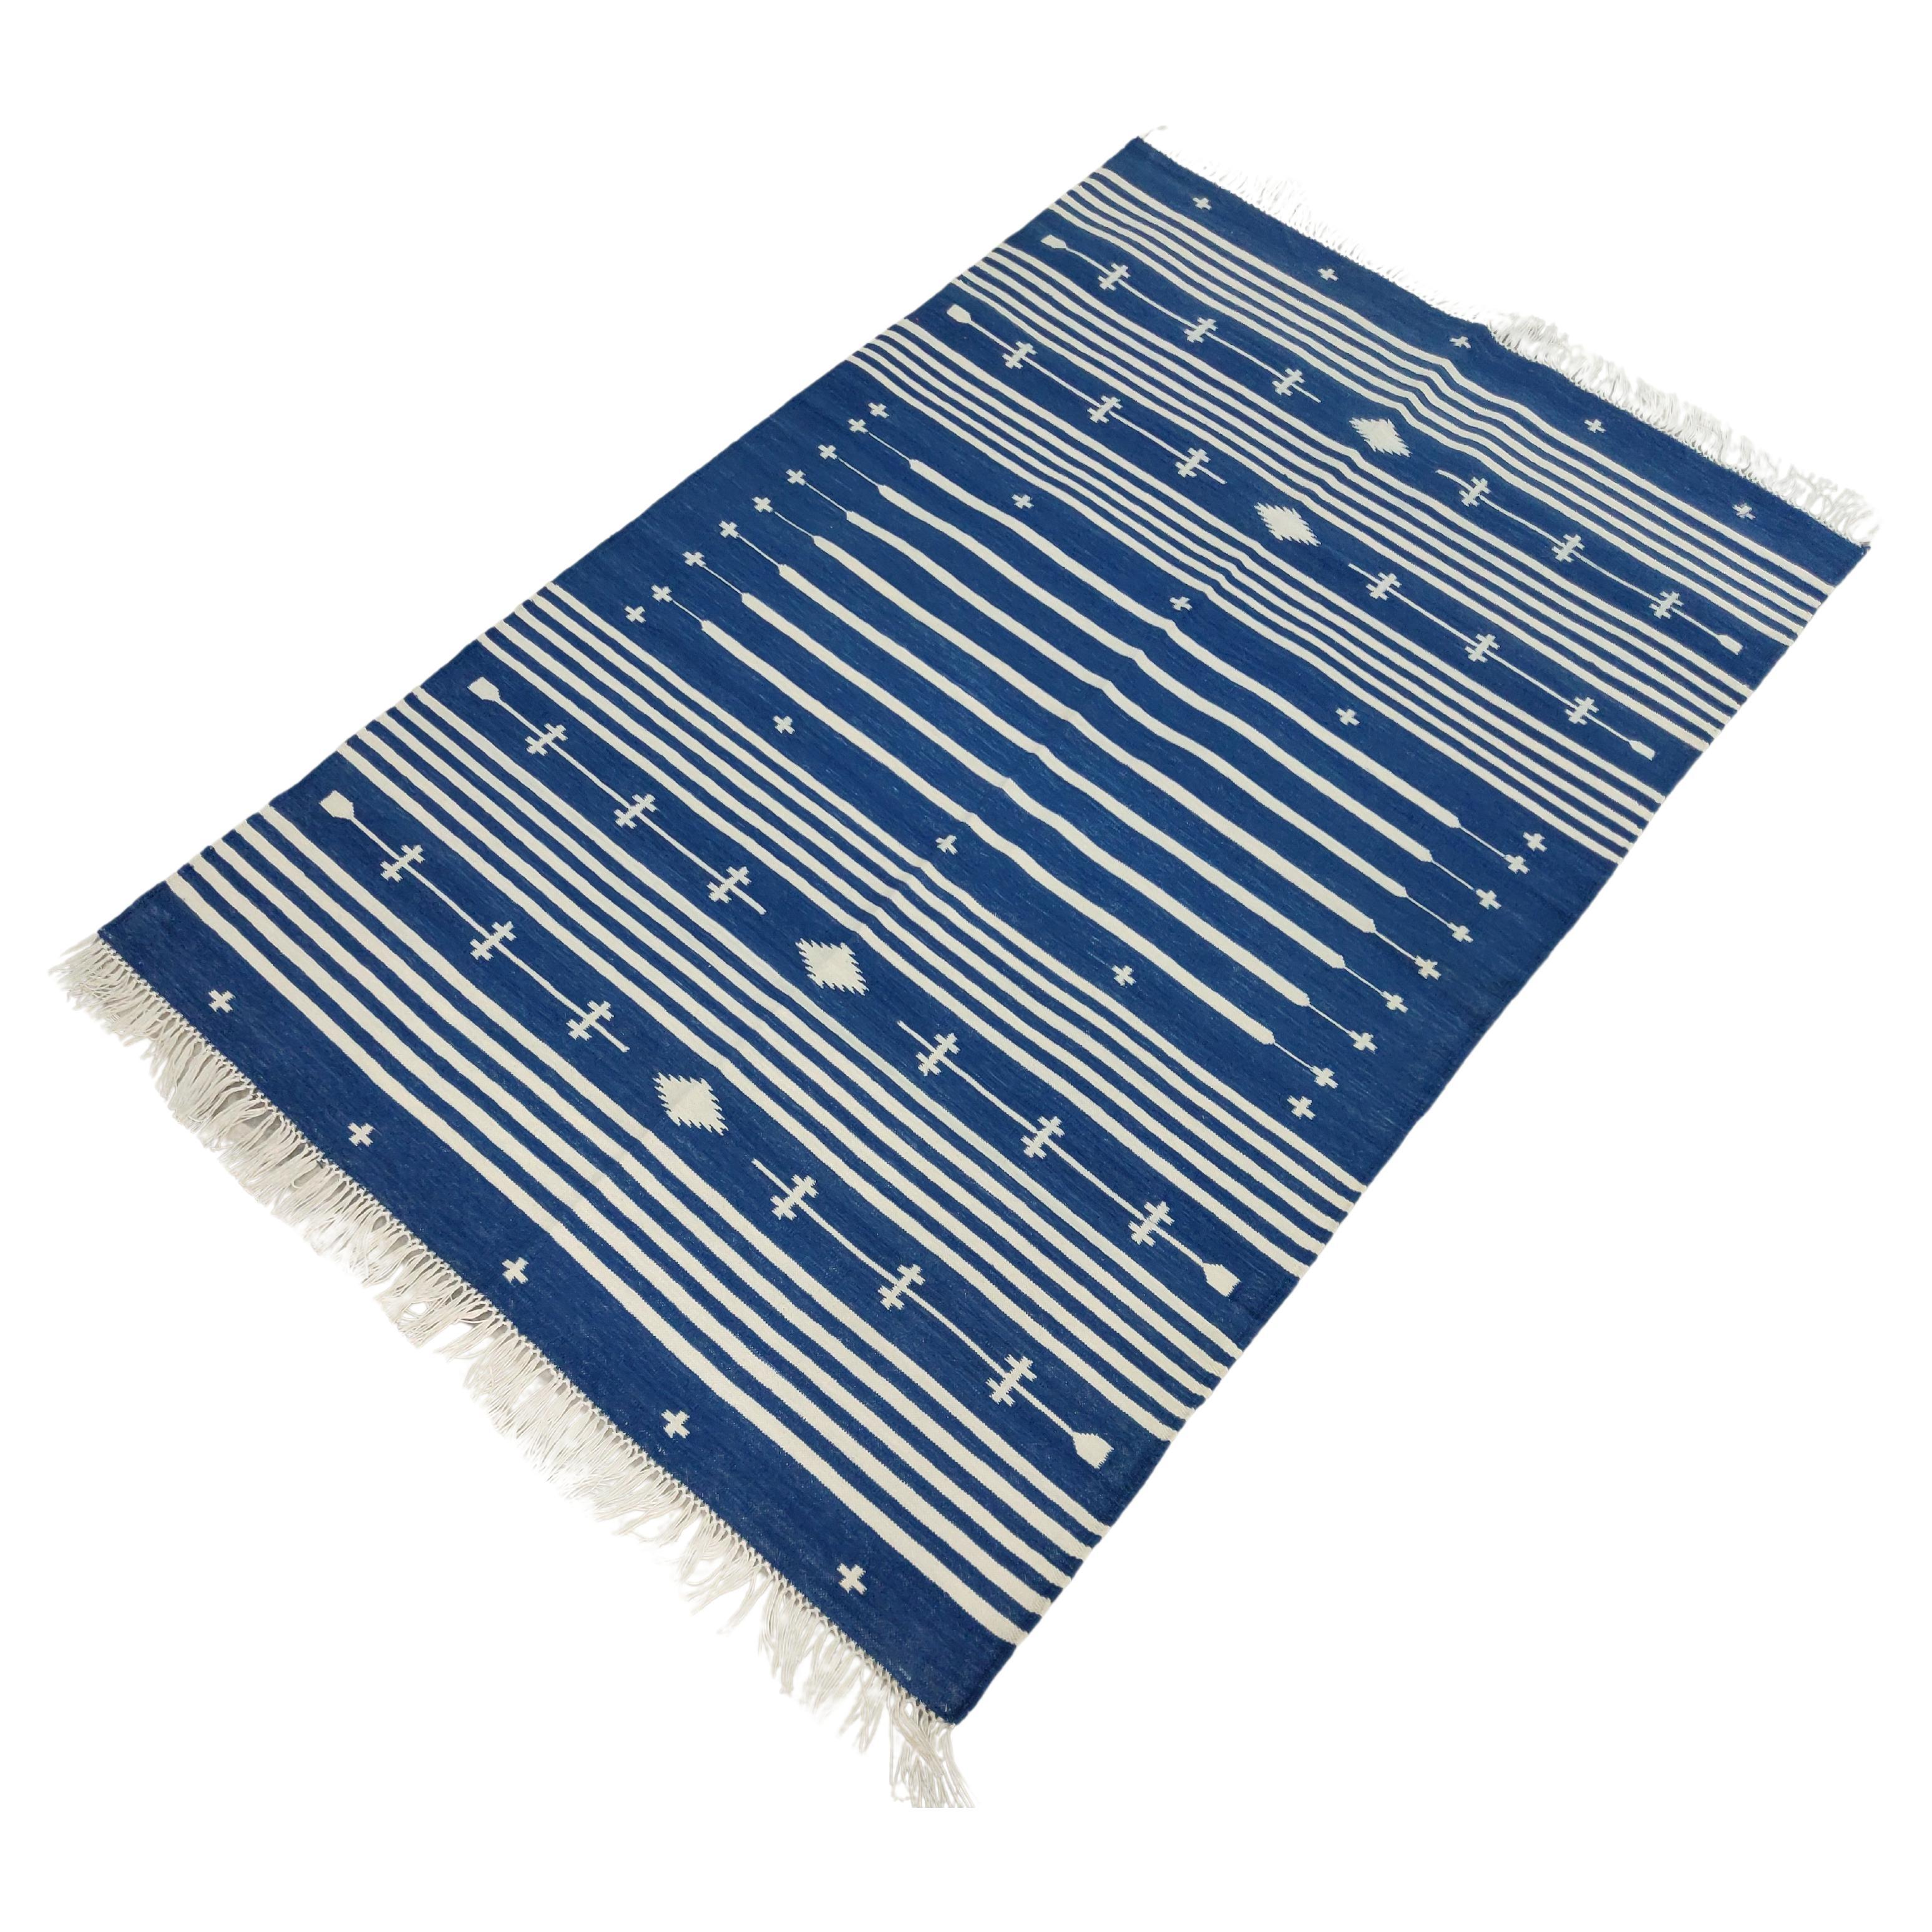 Handmade Cotton Area Flat Weave Rug, 3x5 Blue And White Striped Indian Dhurrie For Sale